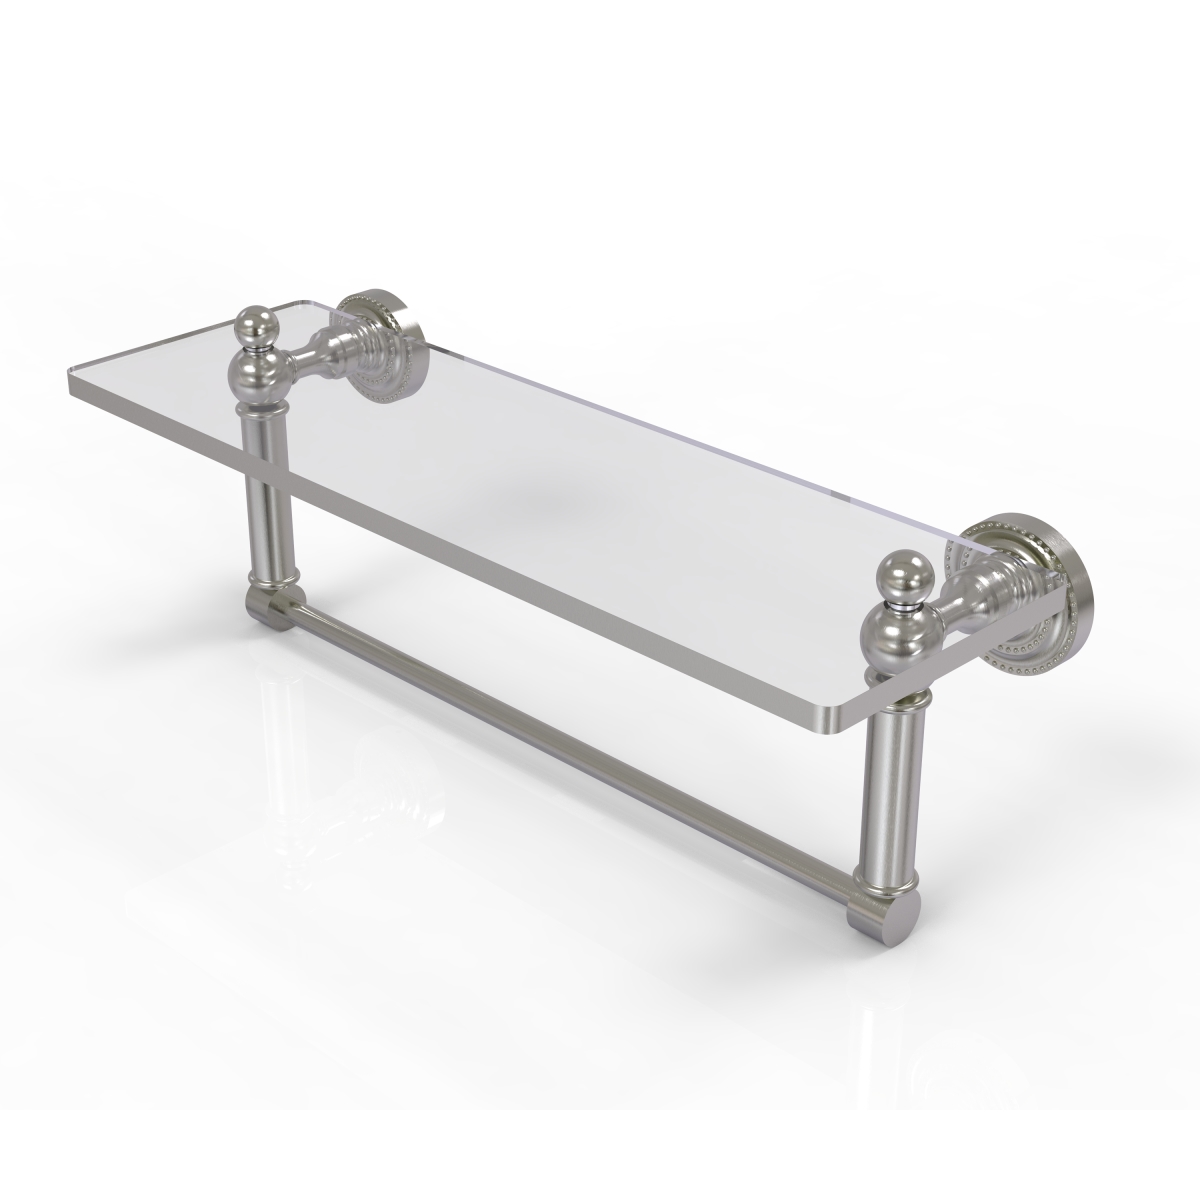 Picture of Allied Brass DT-1TB-16-SN 16 in. Dottingham Glass Vanity Shelf with Integrated Towel Bar, Satin Nickel